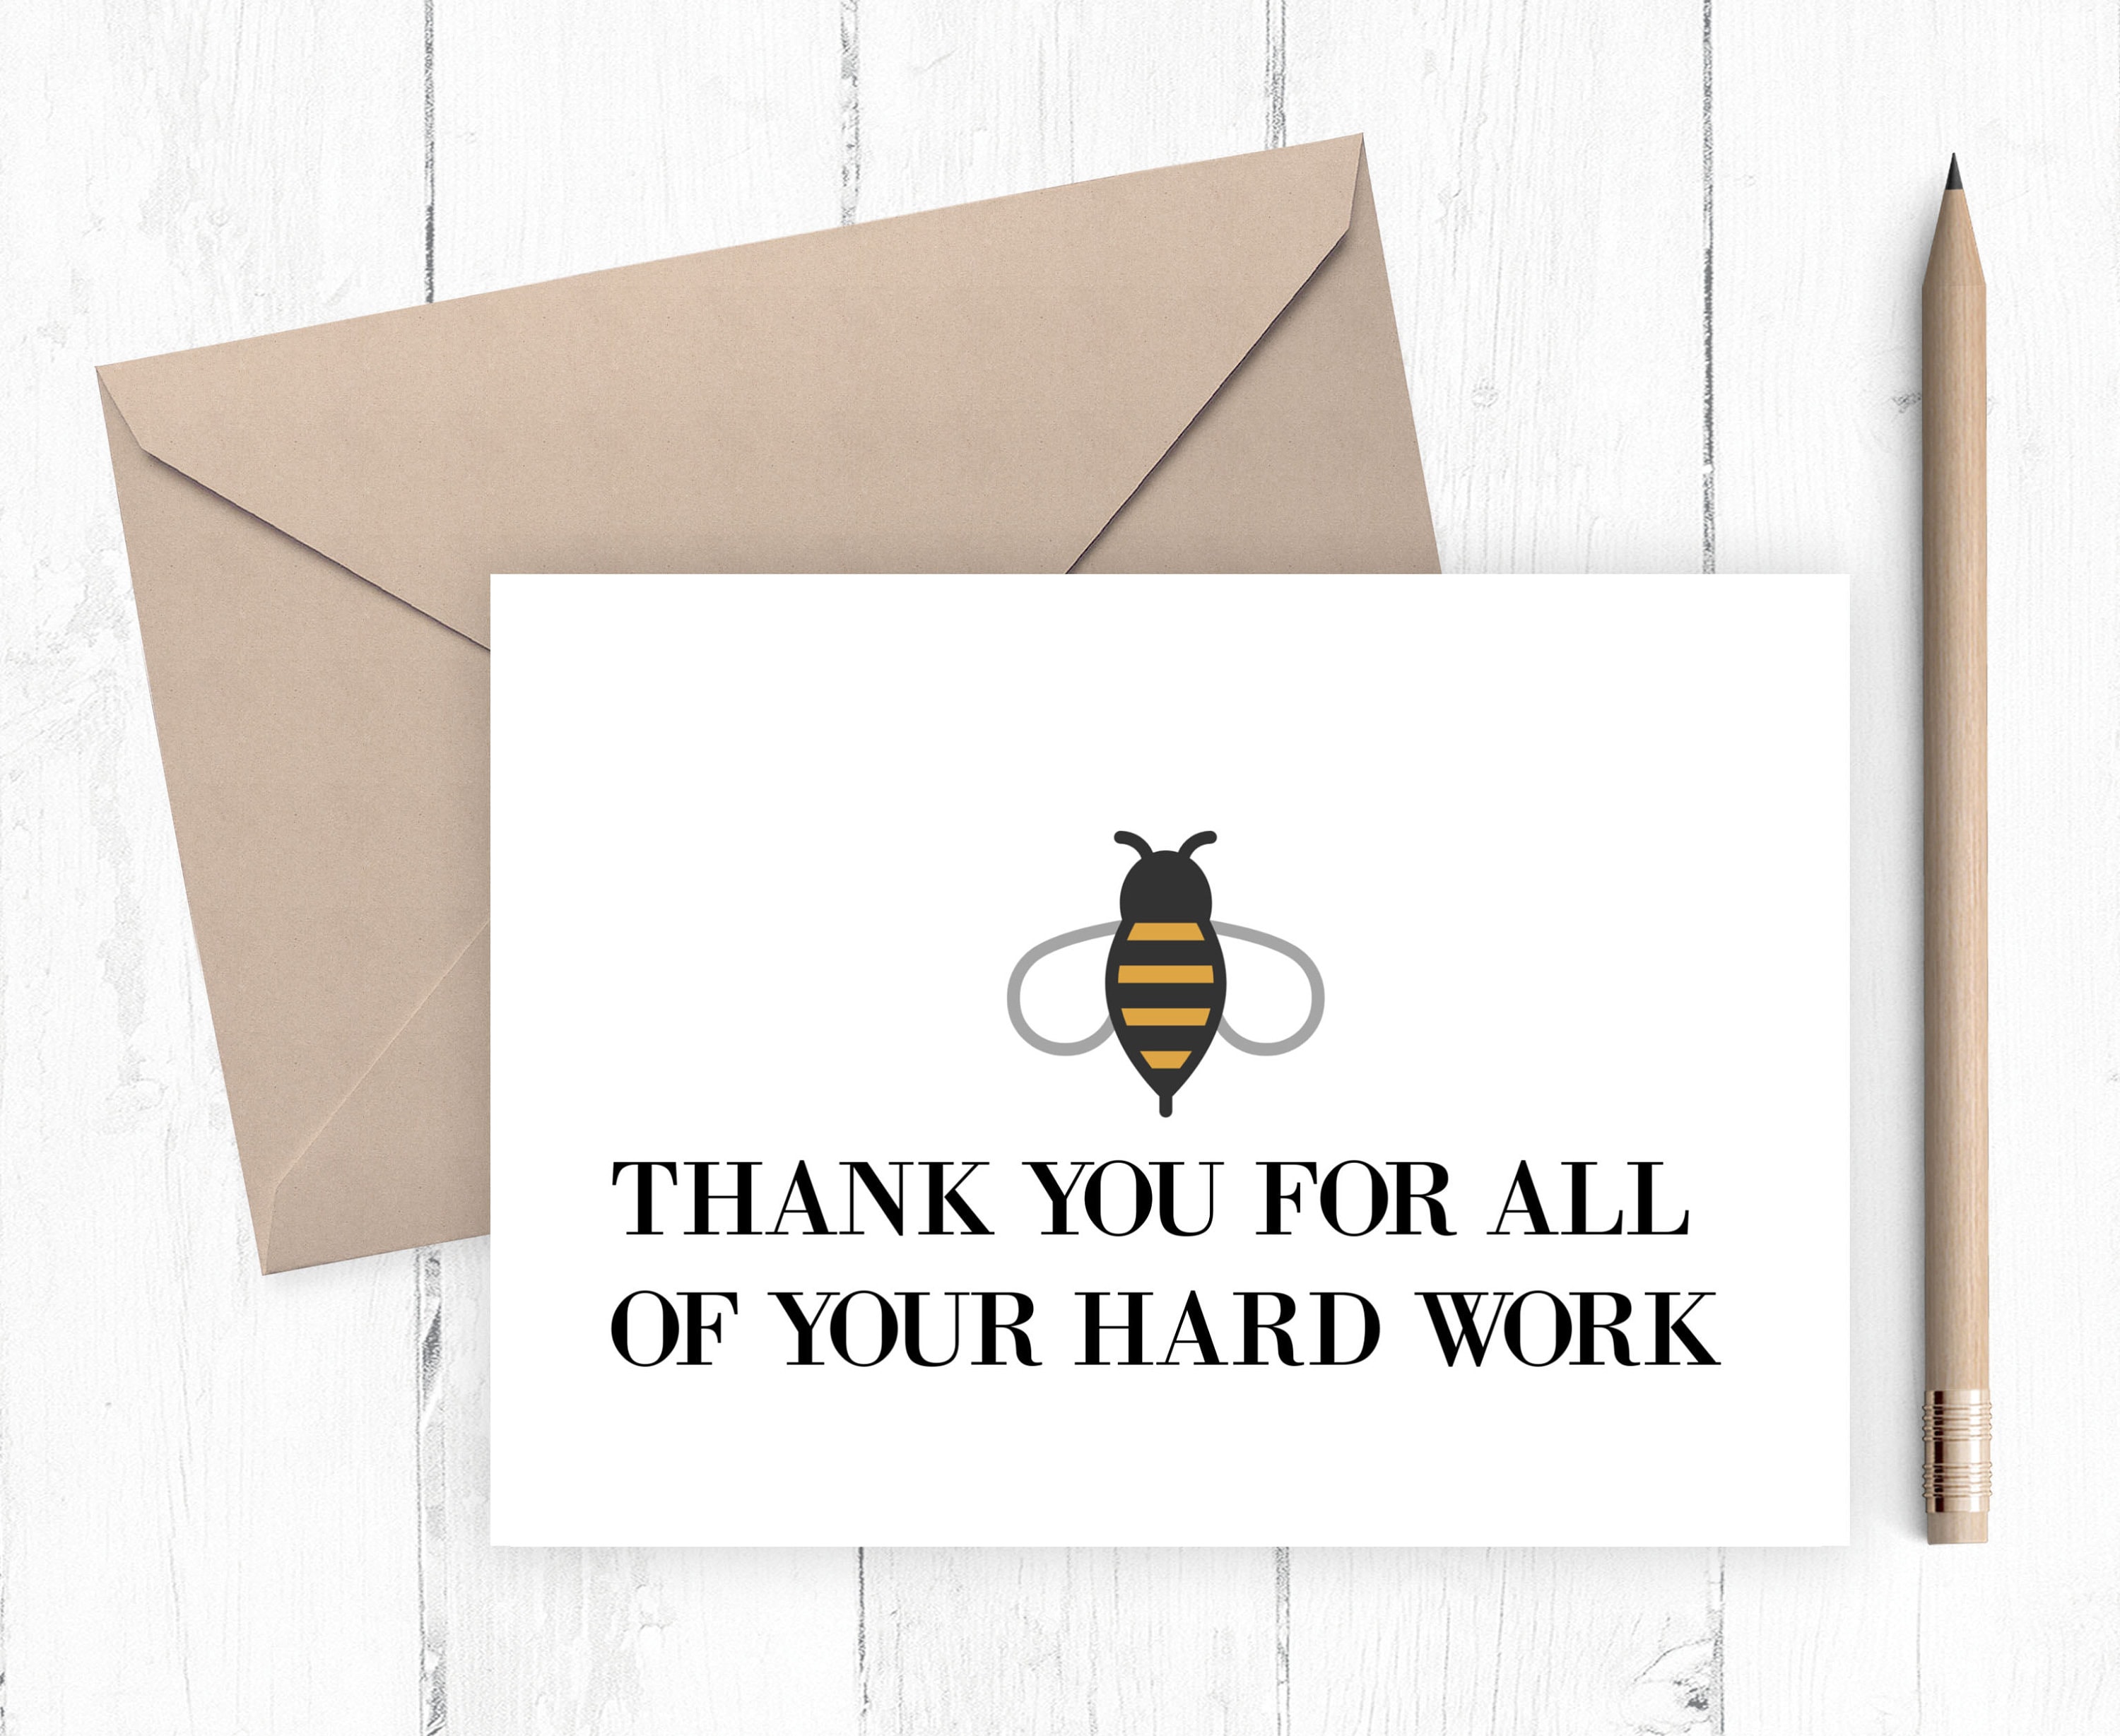 Thank You For All Of Your Hard Work Employee Thank You Card Etsy